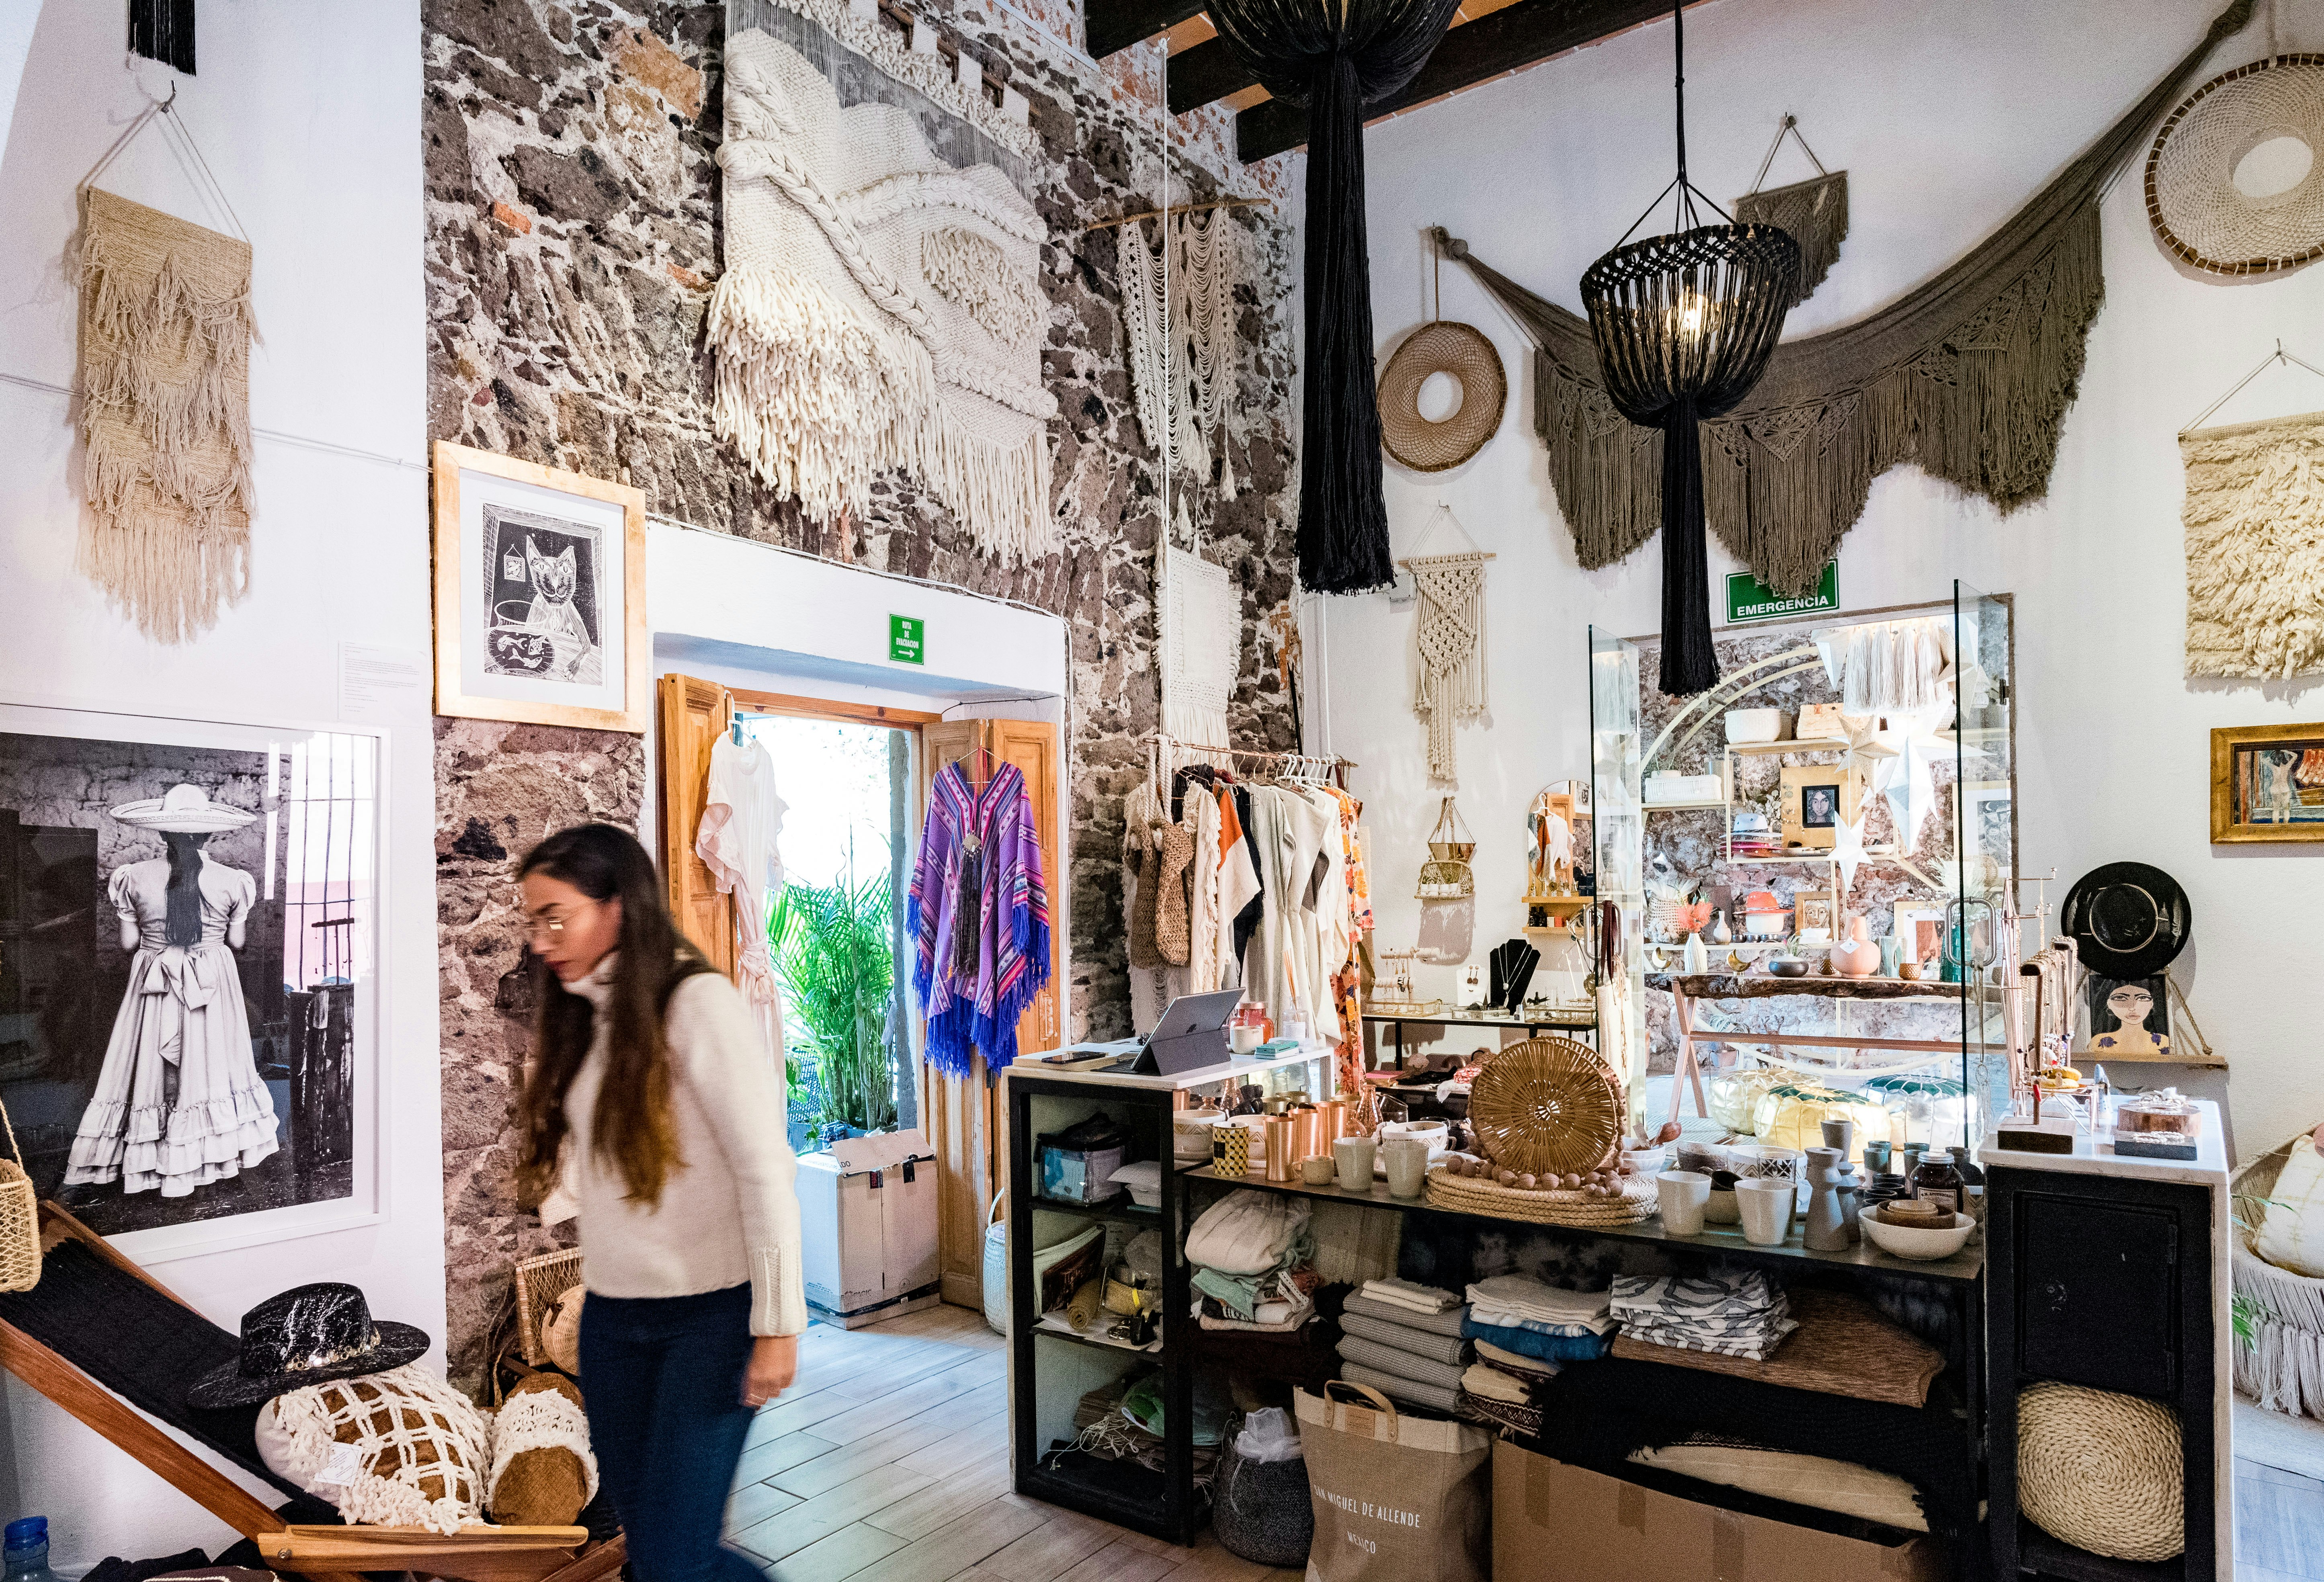 A woman with long brown hair, wearing a cream-colored sweater and jeans, walks through the interior of Mercado Collective, an interior design shop whose stone and white-washed walls are covered in hanging fabrics, with racks of clothing and jewelry visible in the background